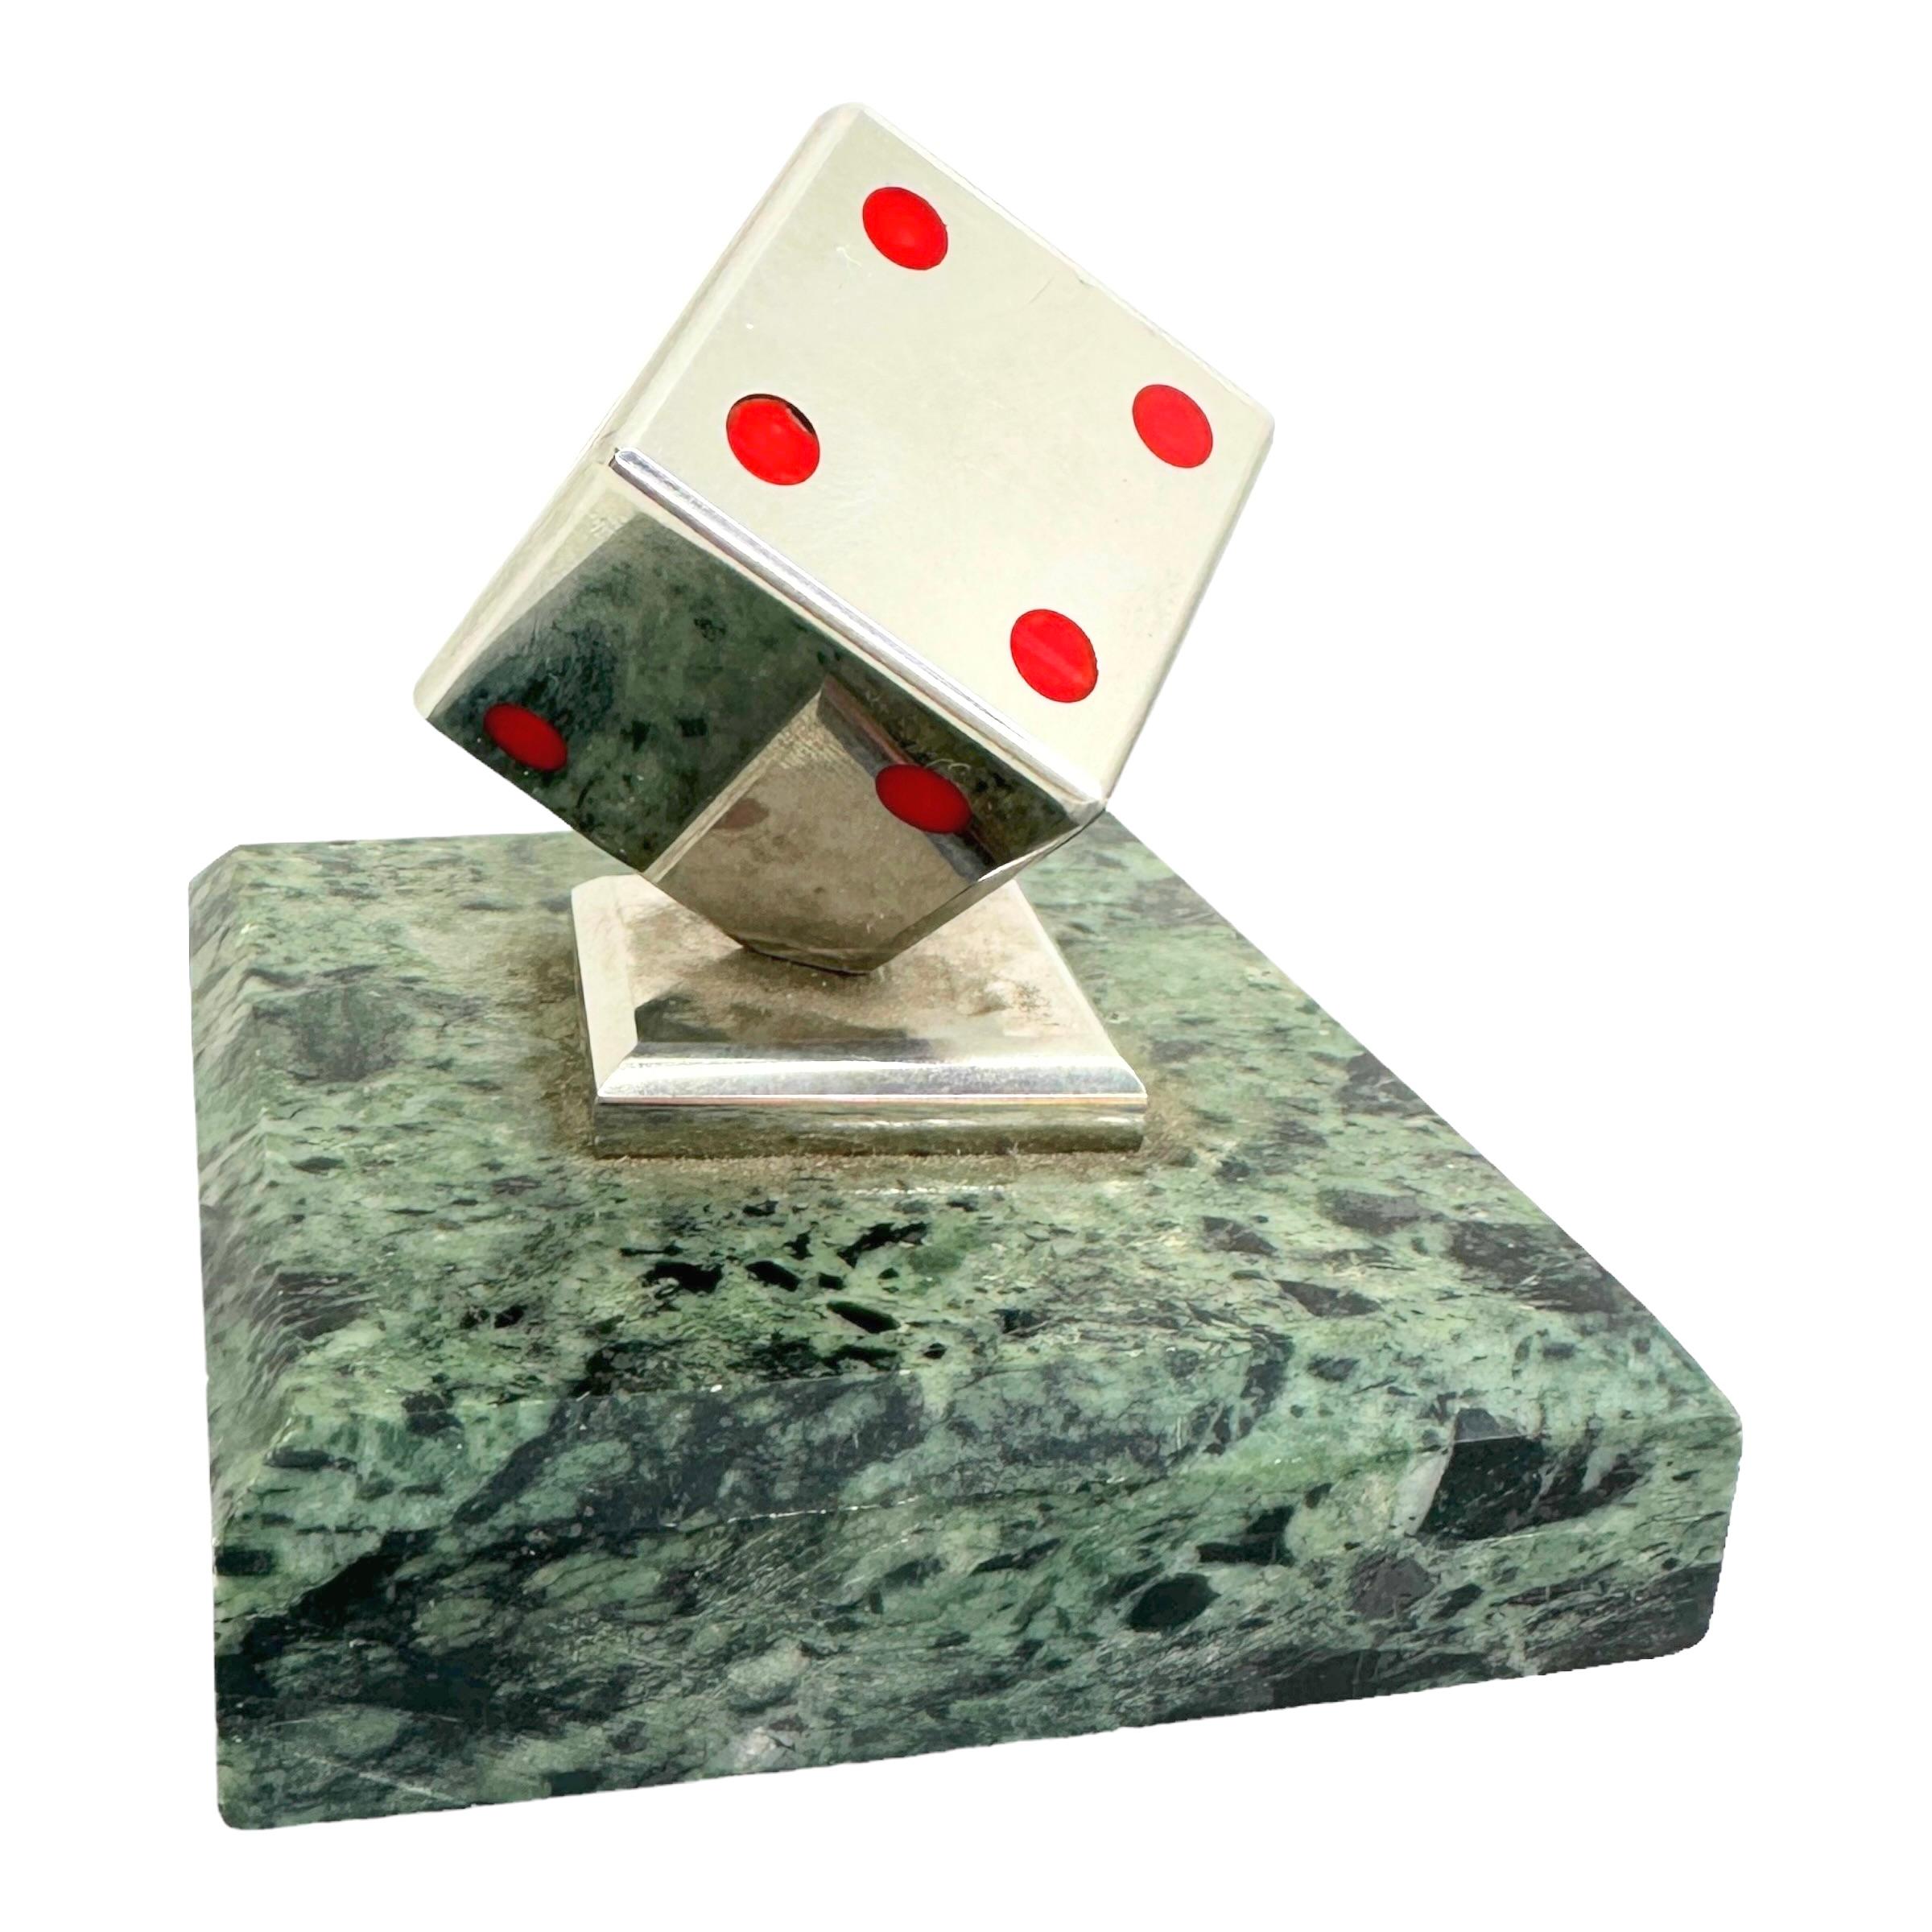 Late 20th Century Dice Metal Statue on Marble Base Paper Weight Mid-Century Modern, German, 1970s For Sale